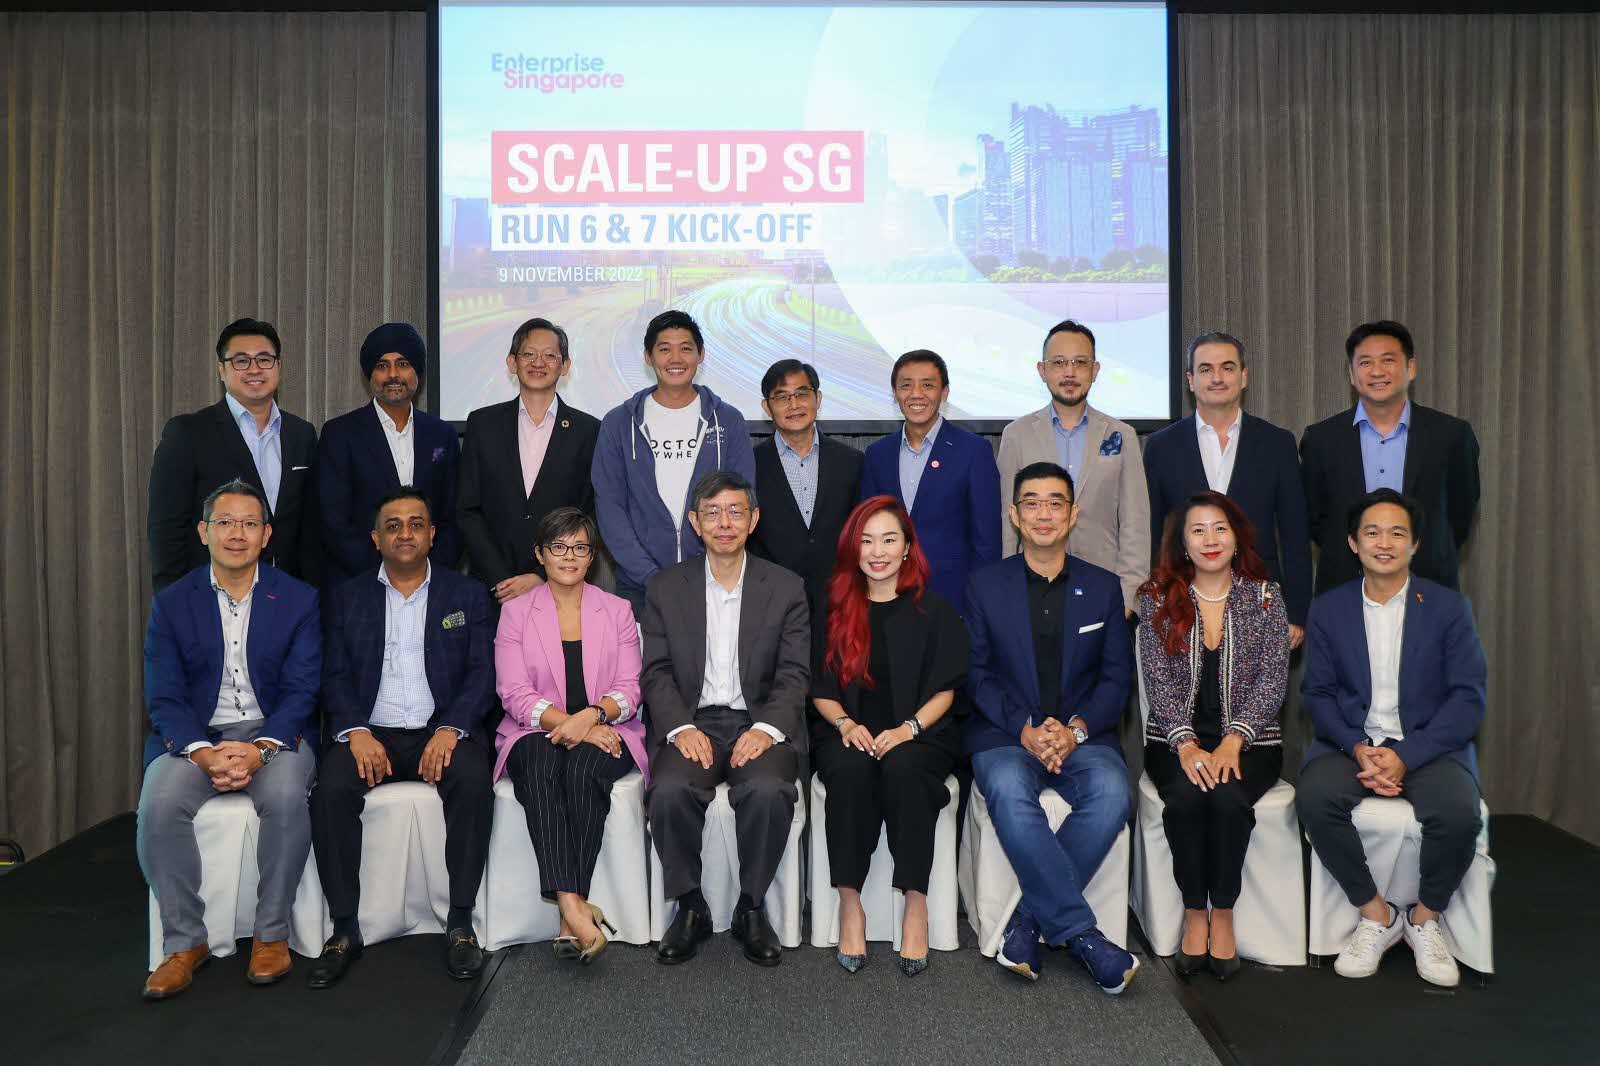 Launch of Scale-Up runs 6,7